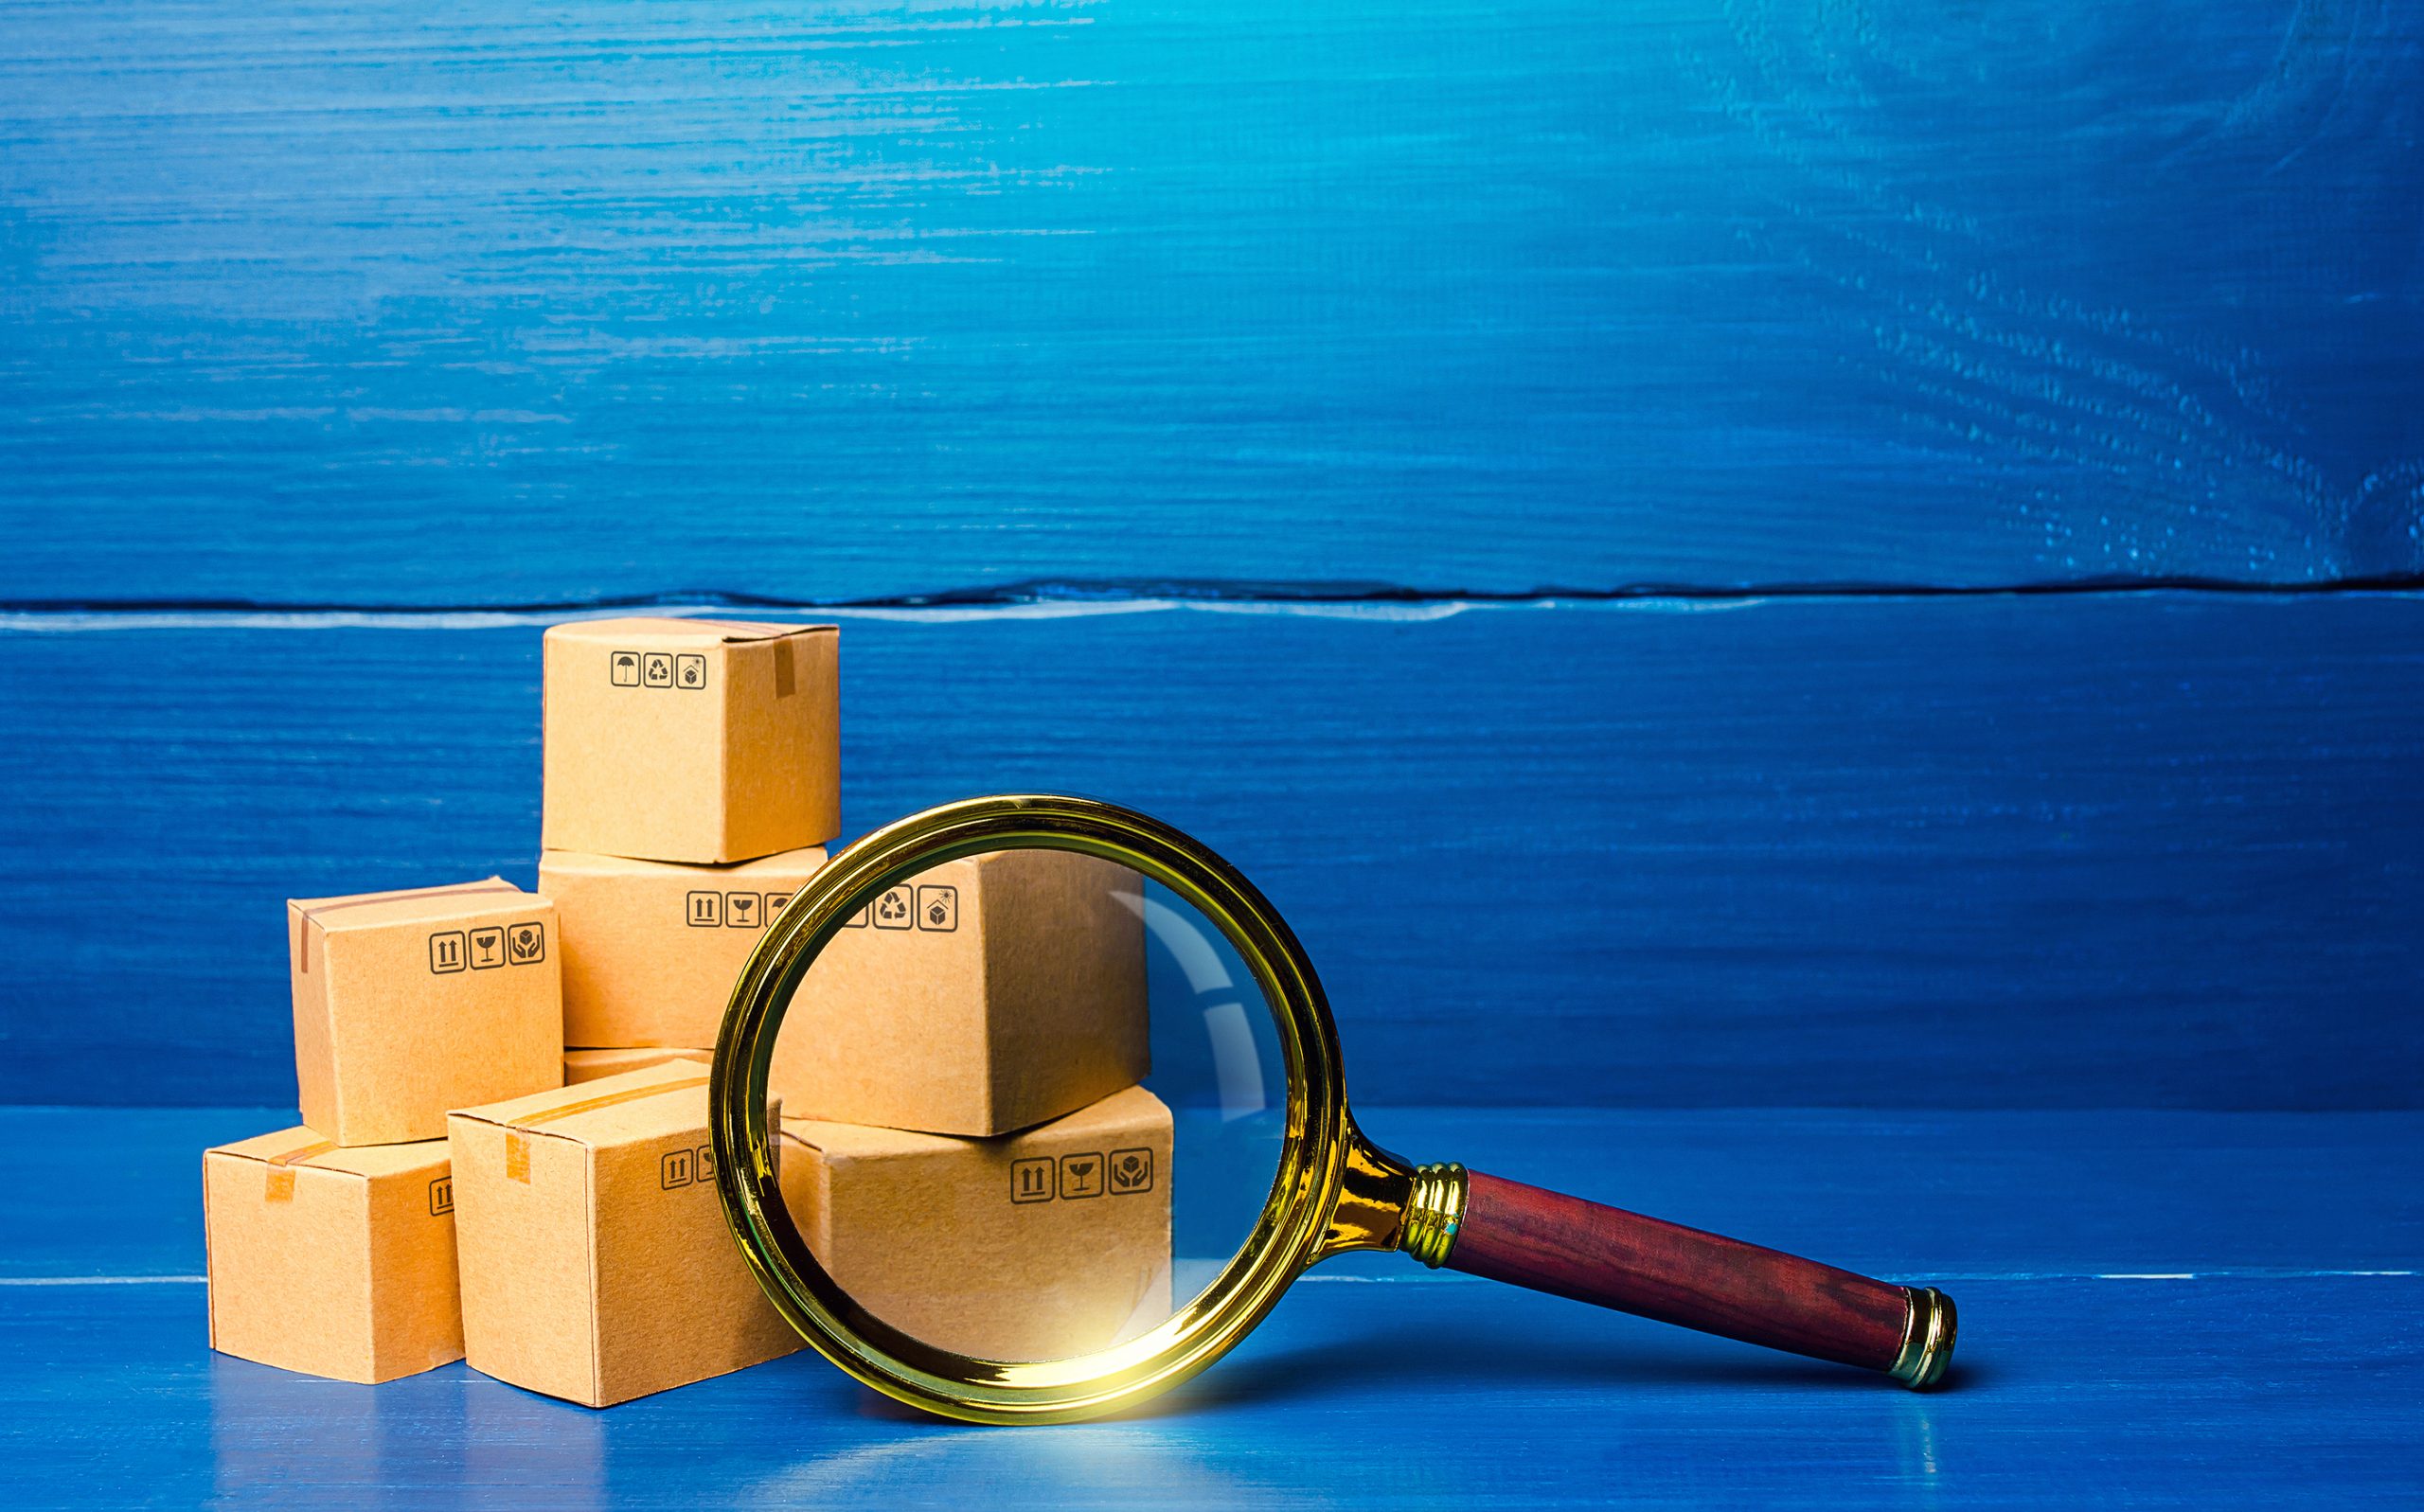 Cardboard boxes and magnifying glass. Concept of searching for goods and components. Procurement audit. Quality control. Supply and demand, distribution of products on the market. Cargo tracking